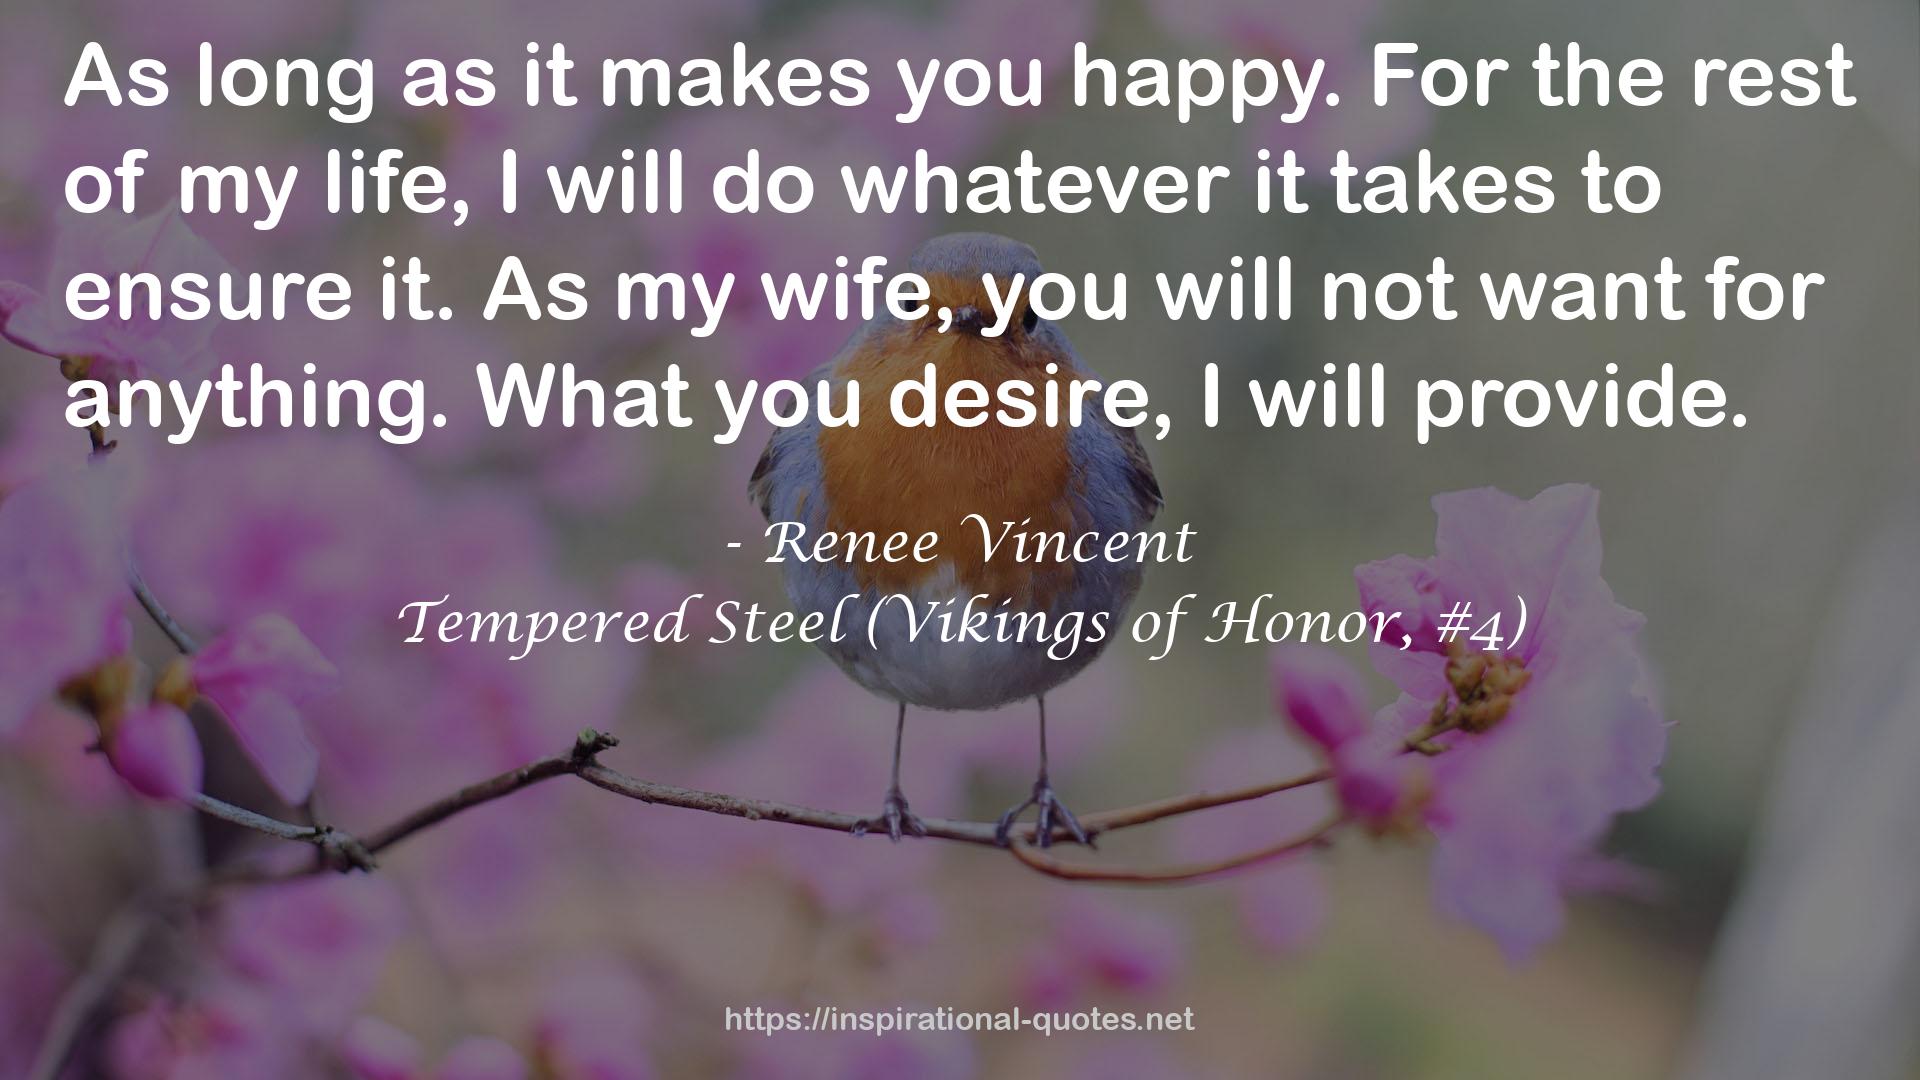 Tempered Steel (Vikings of Honor, #4) QUOTES